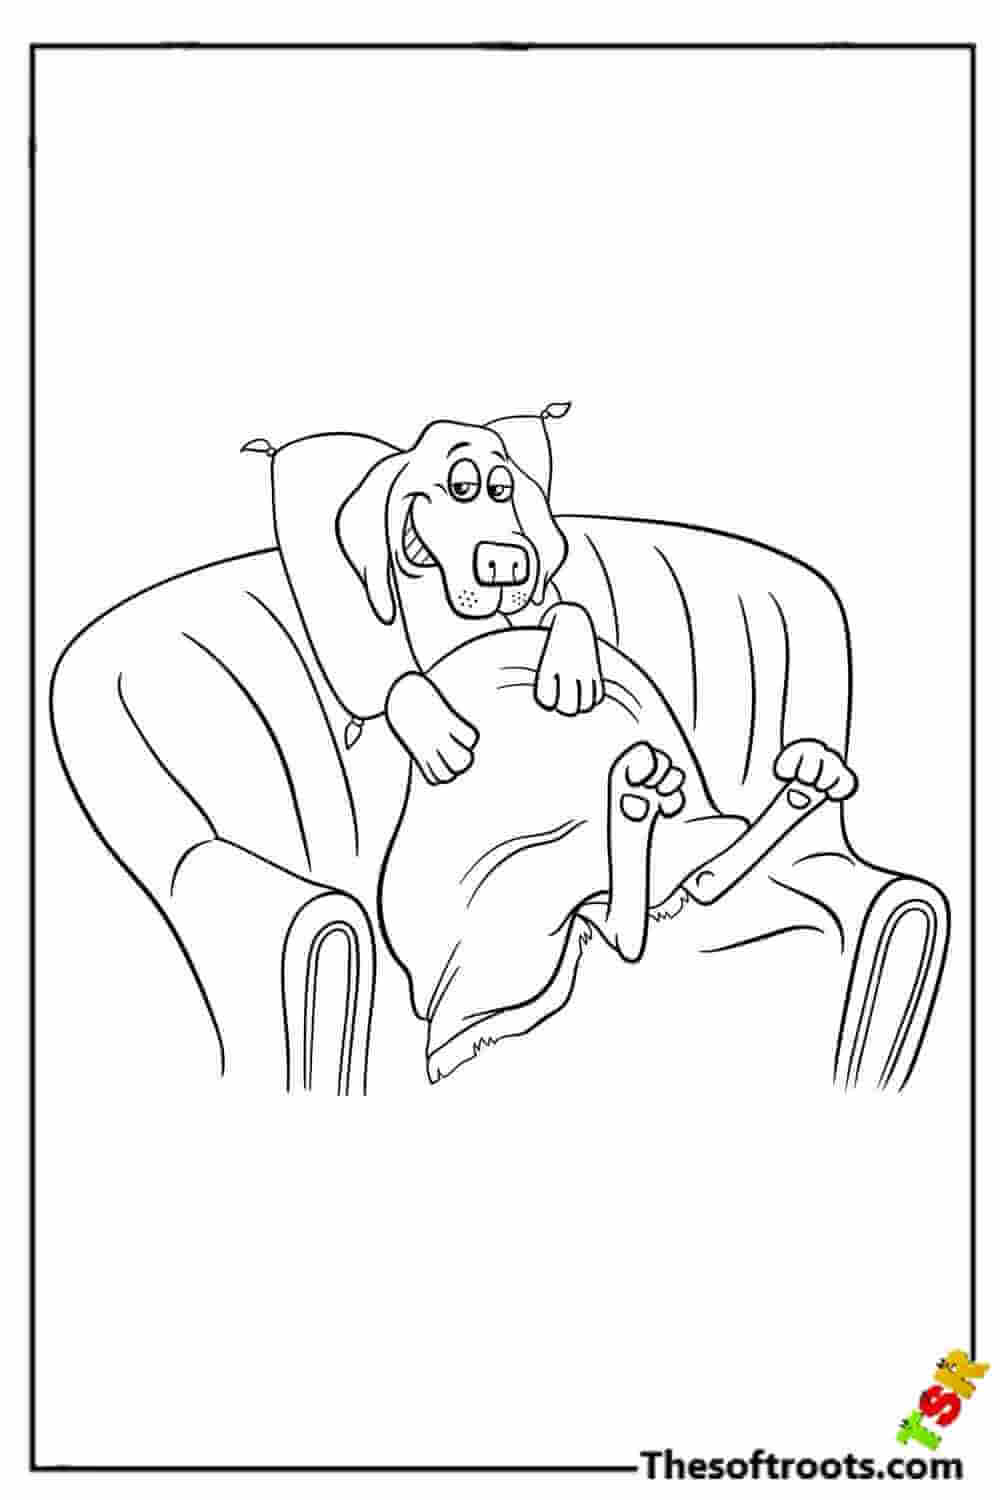 Puppy on the couch coloring pages